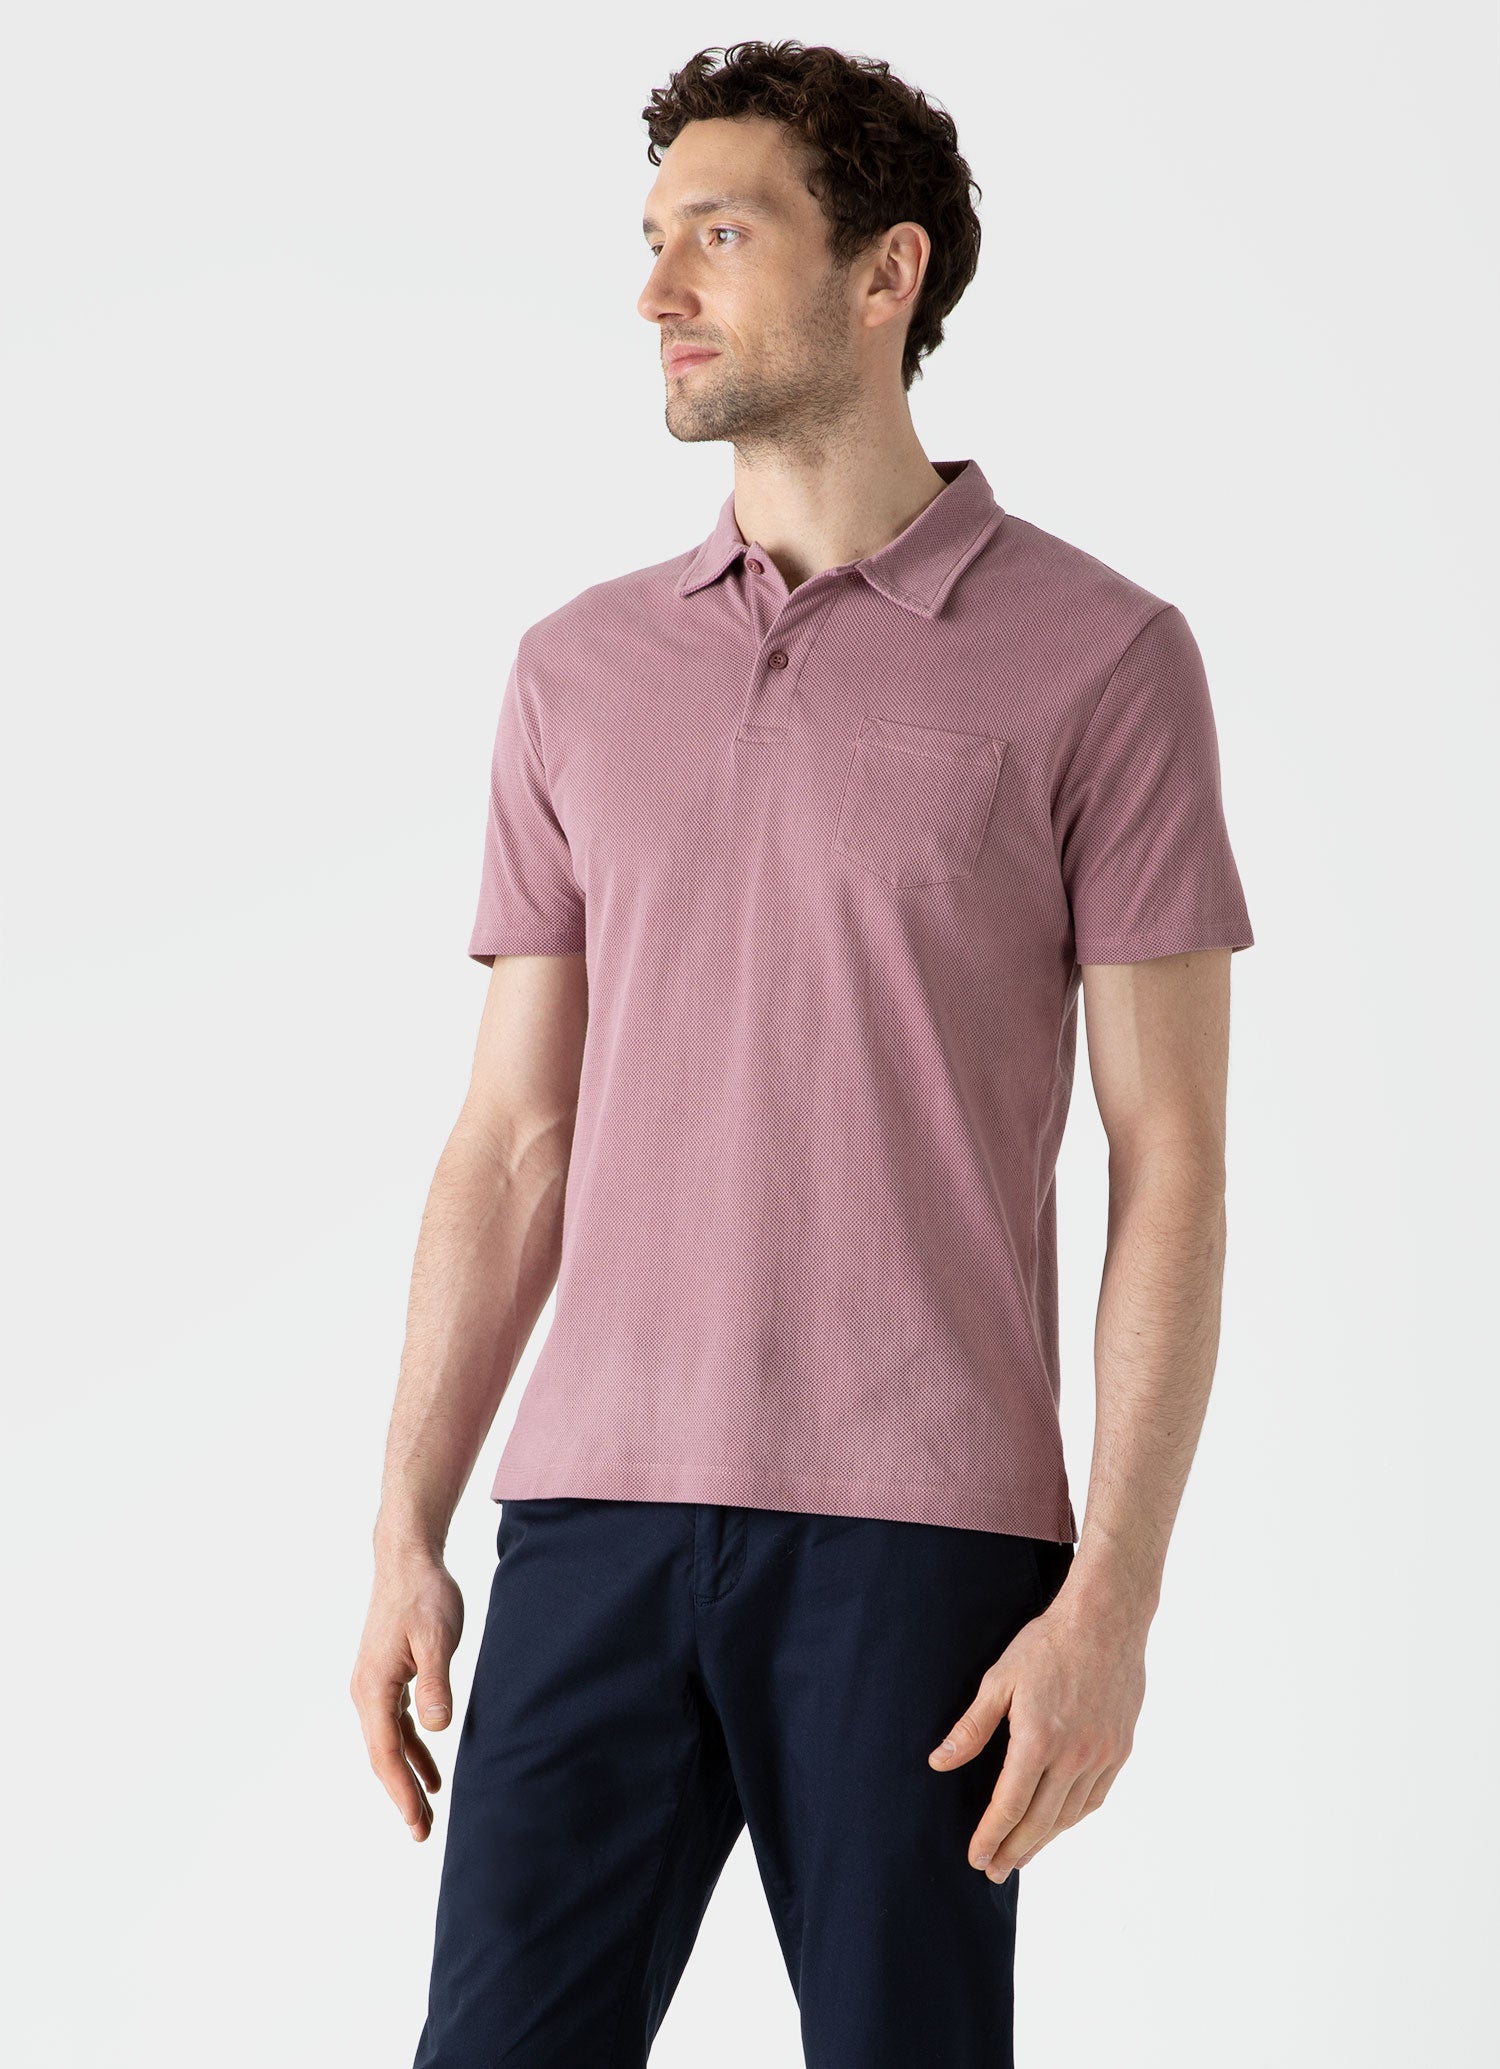 Men's Riviera Polo Shirt in Vintage Pink